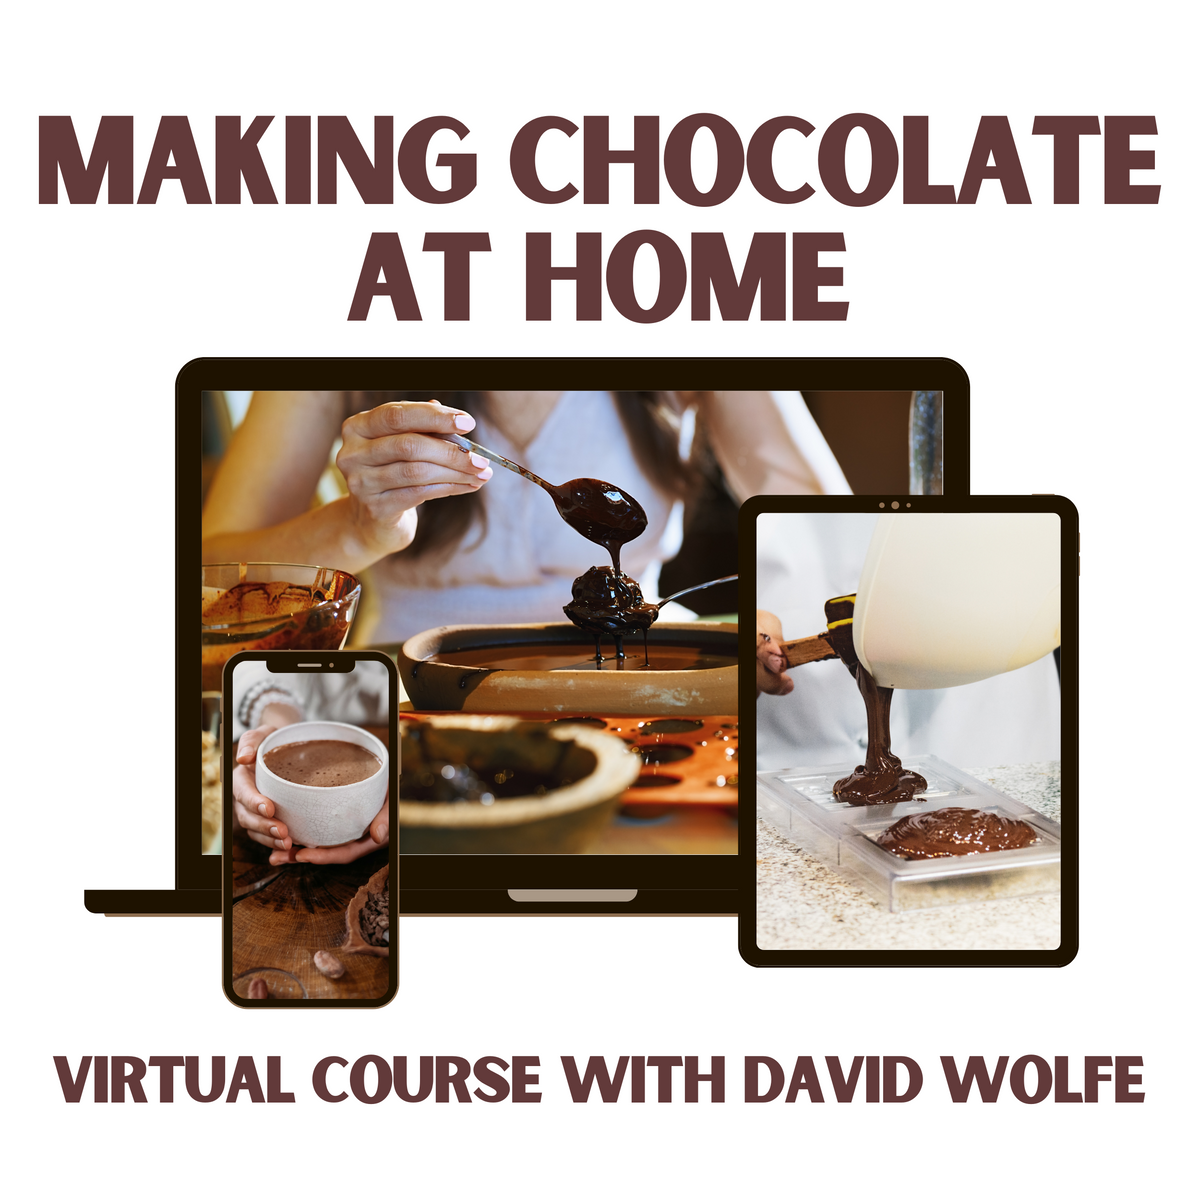 Making Chocolate At Home With David Avocado Wolfe